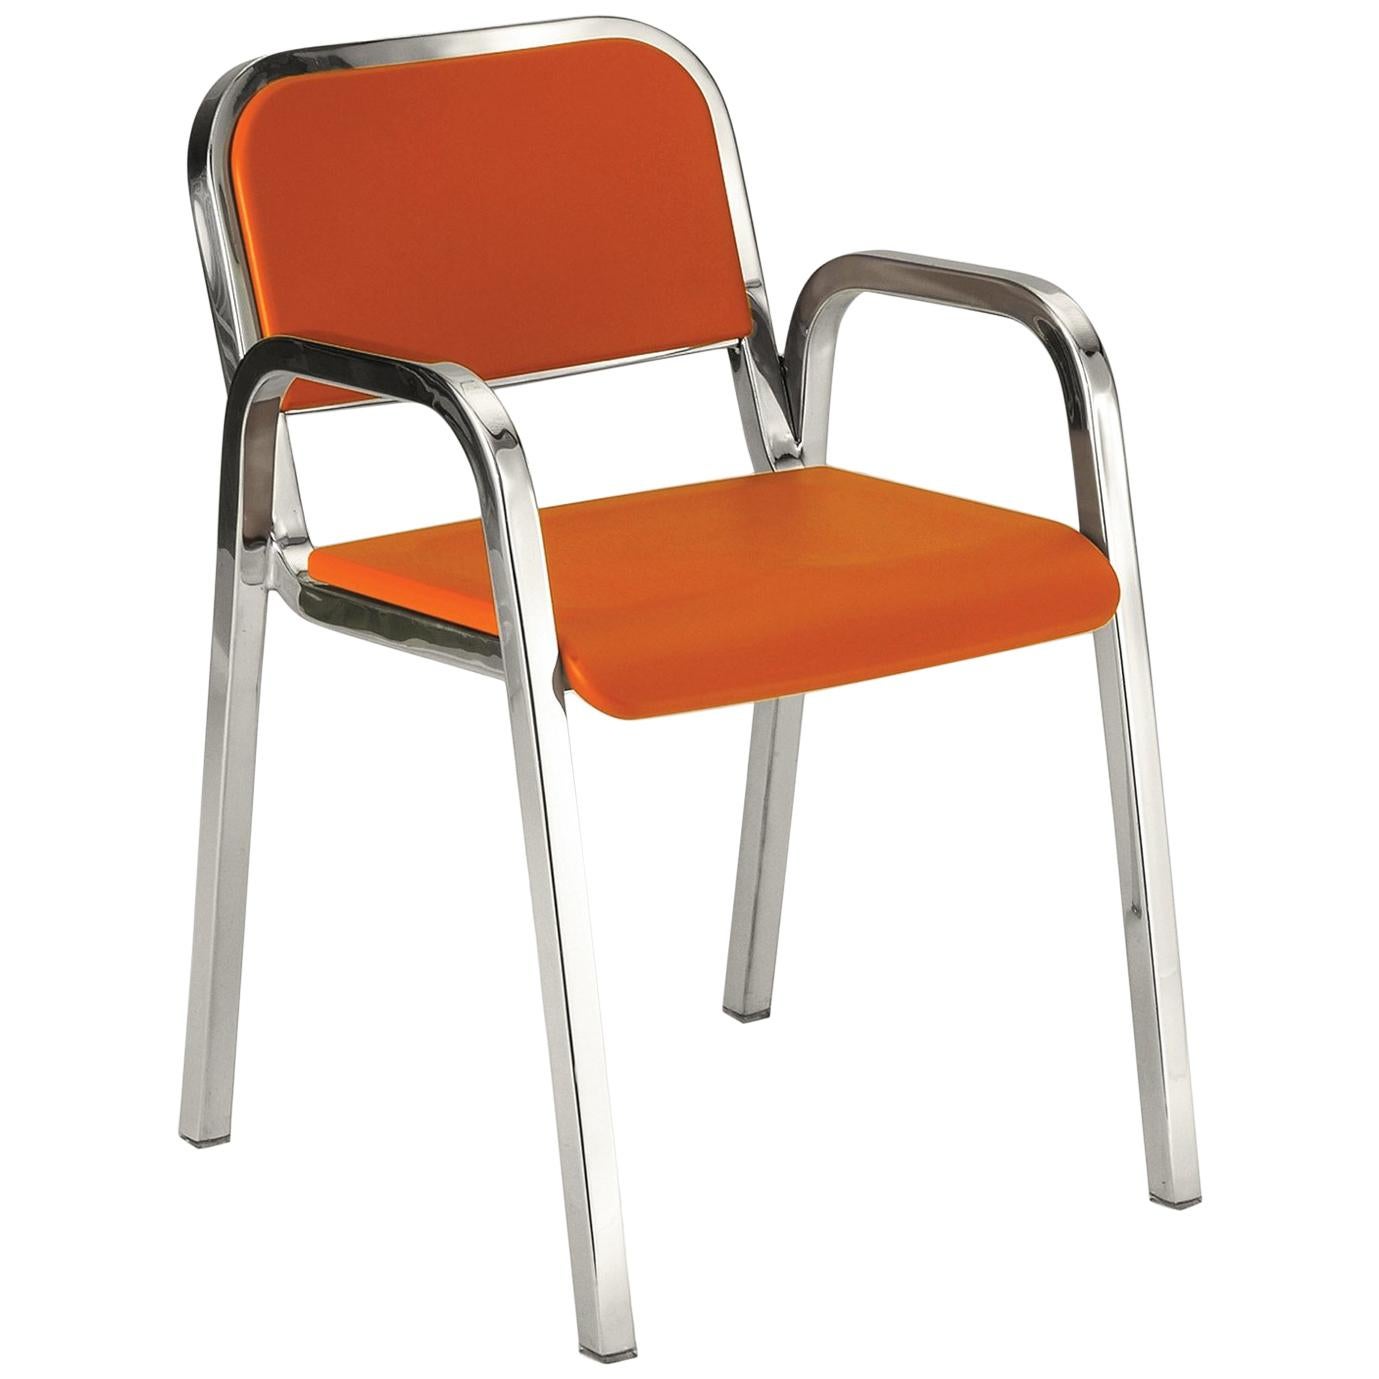 Emeco Nine-0 Armchair in Polished Aluminum and Orange by Ettore Sottsass